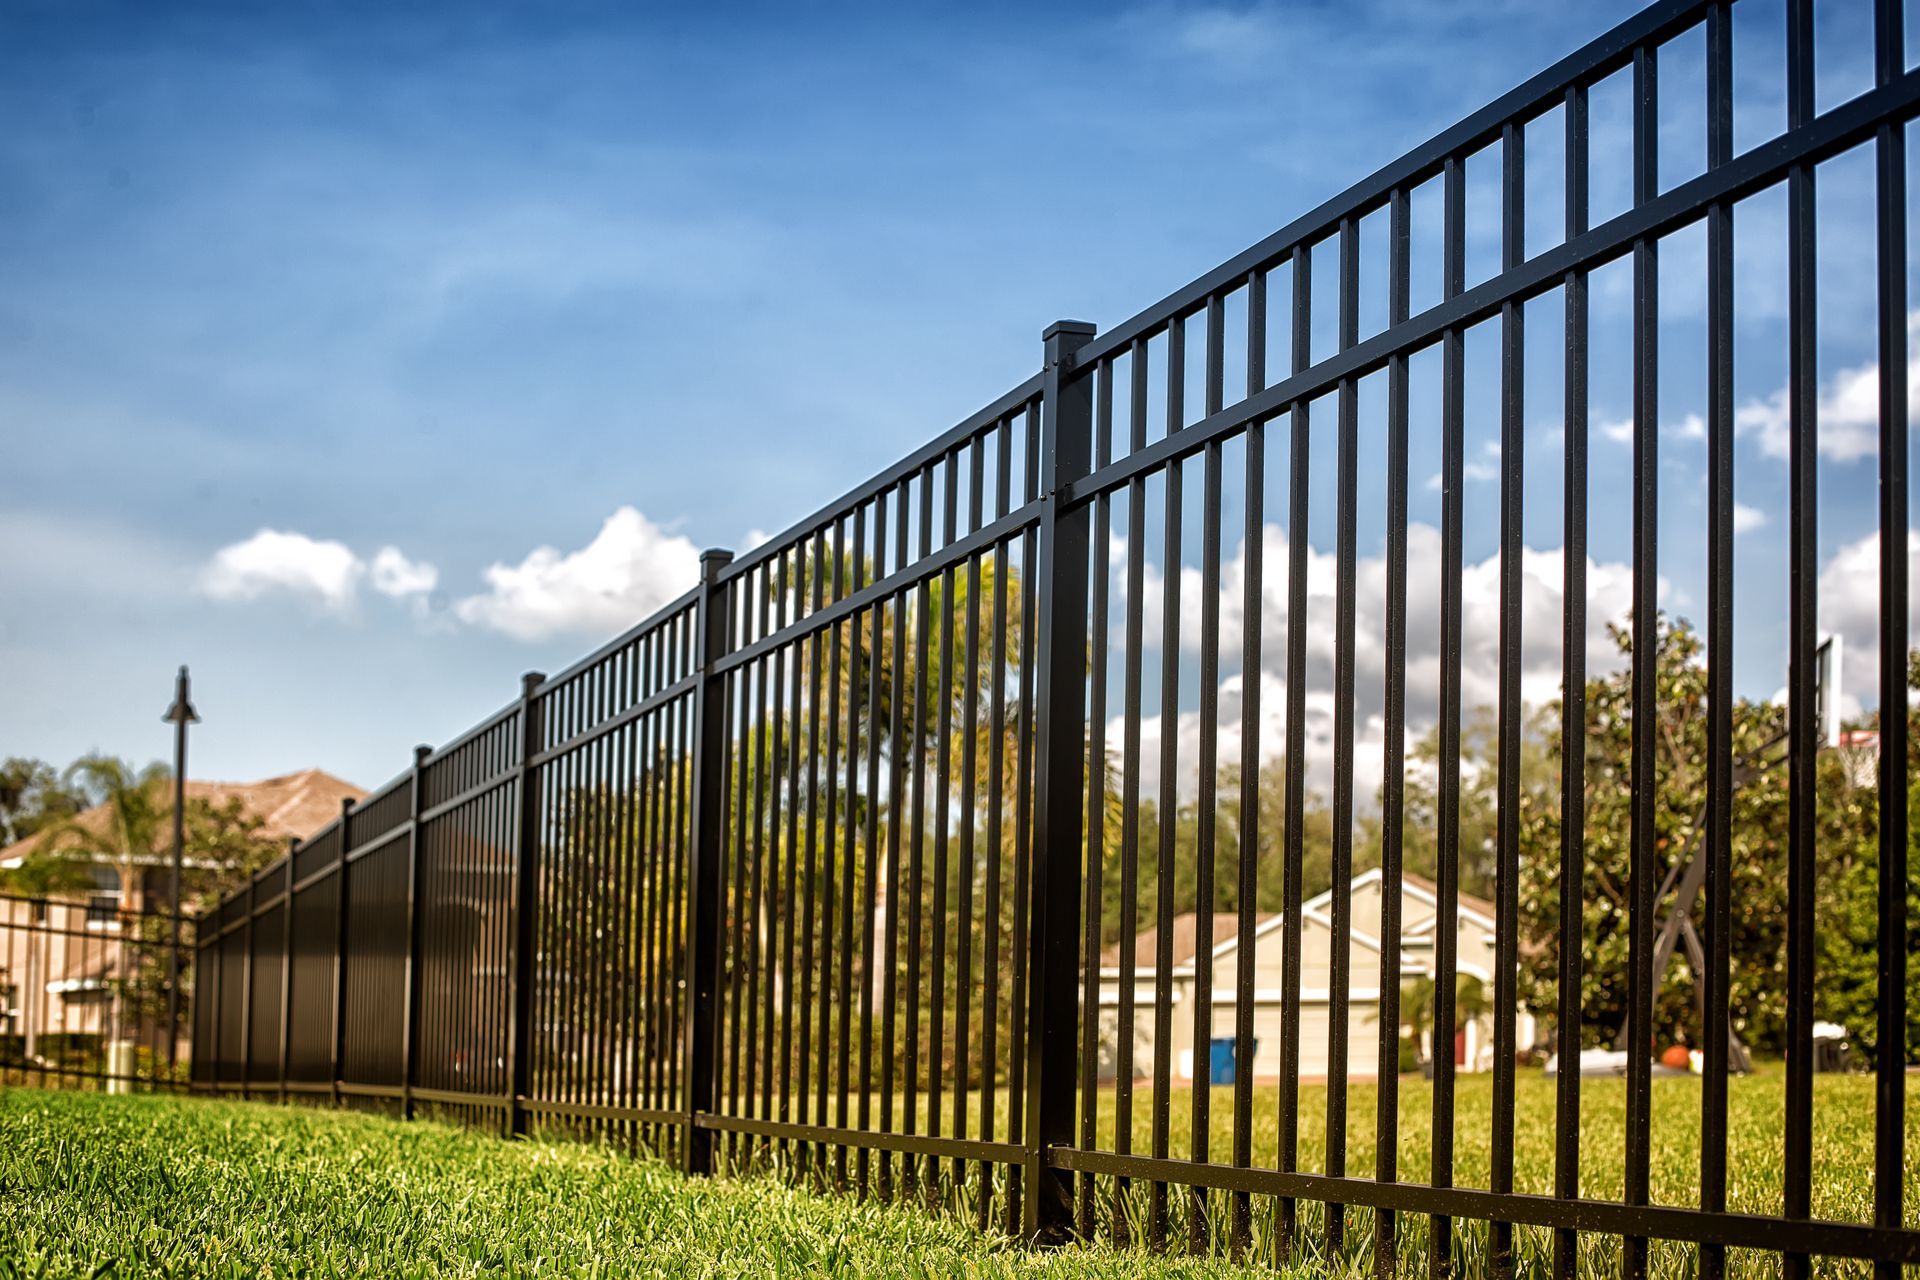 a black metal fence surrounds a lush green field